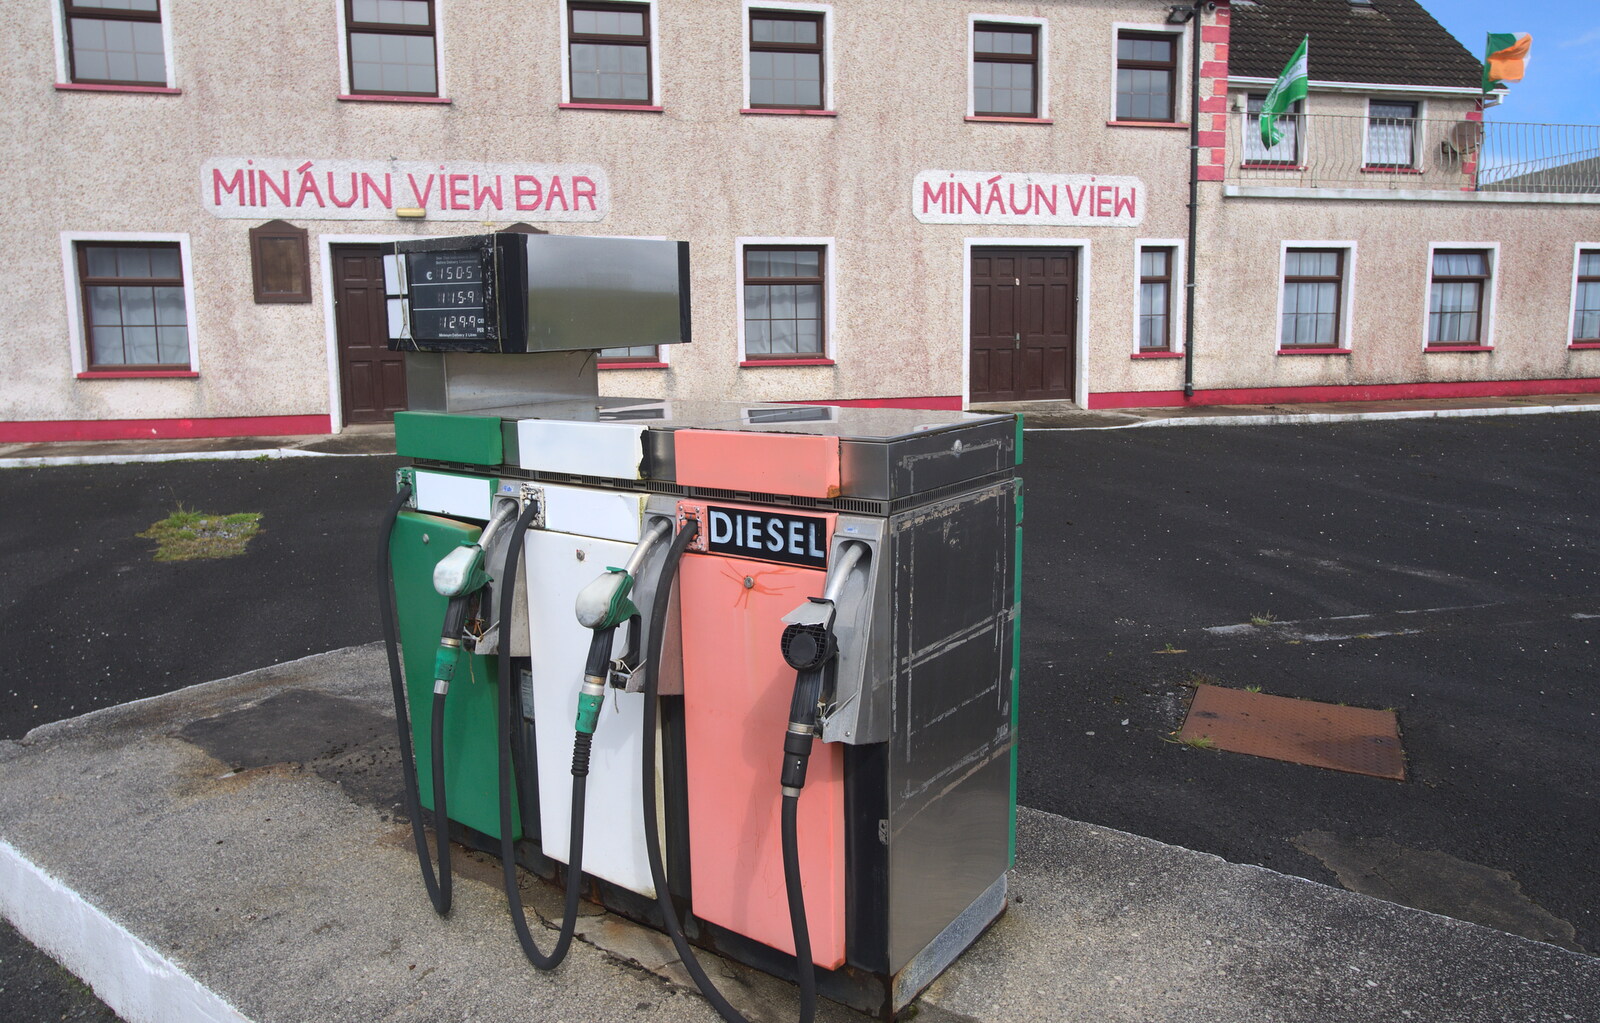 Some abandoned petrol pumps, in Irish tricolour from Surfing Achill Island, Oileán Acla, Maigh Eo, Ireland - 8th August 2017